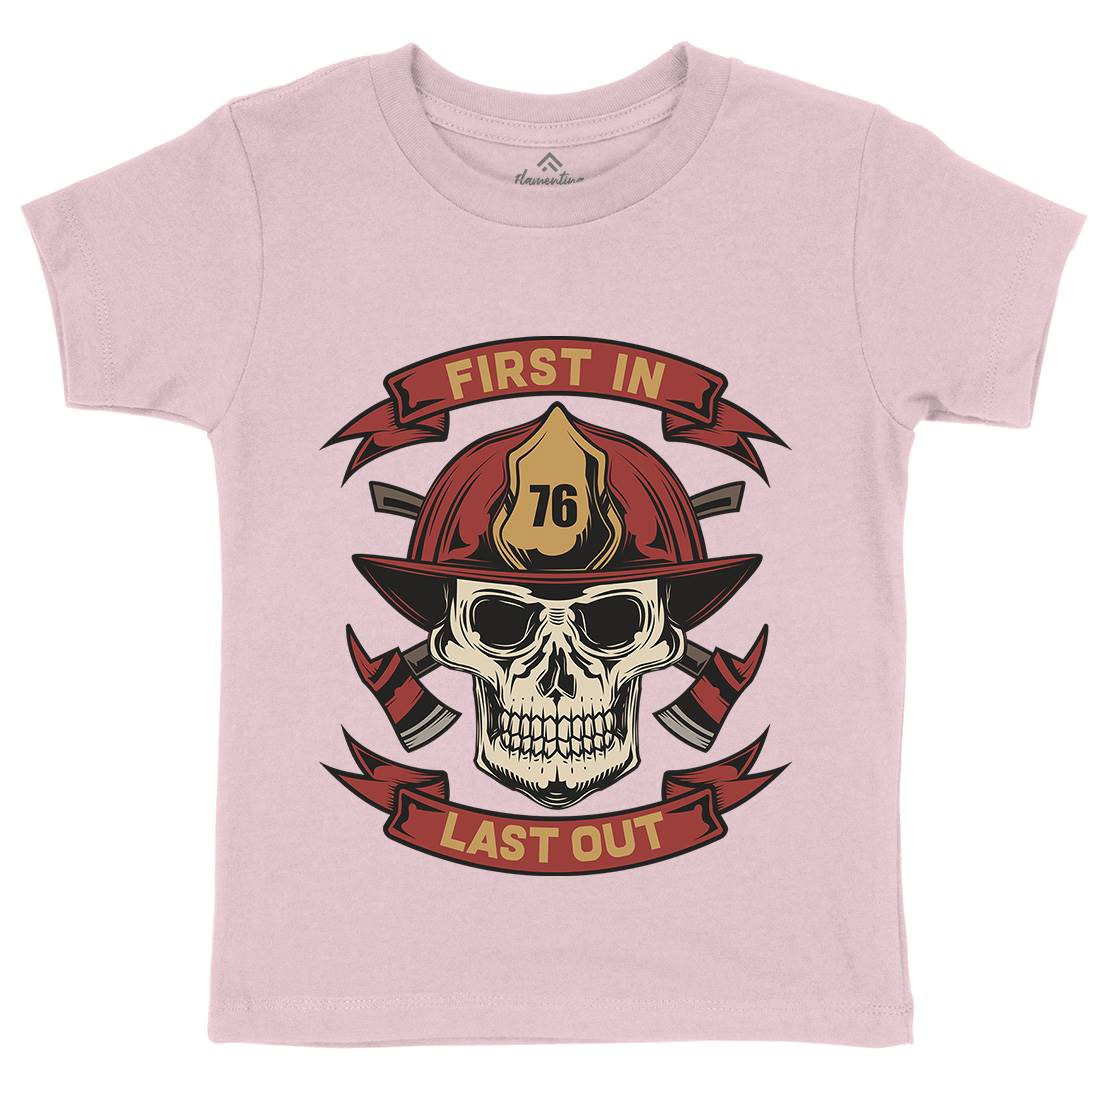 First In Last Out Kids Crew Neck T-Shirt Firefighters C825